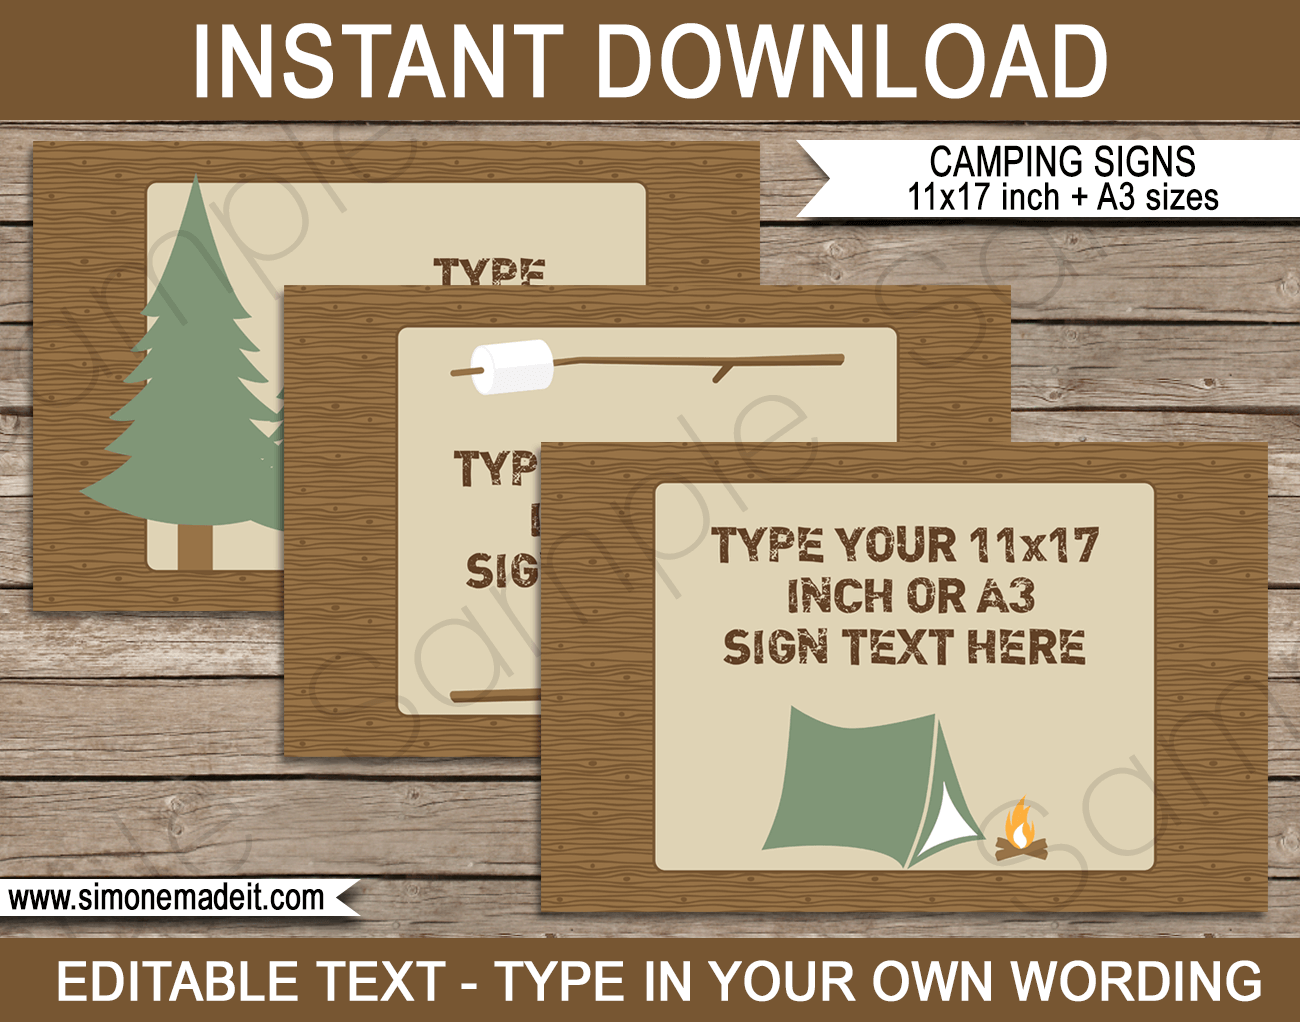 Camping Party Signs | Editable & Printable DIY Templates | Party Decorations | Tabloid / Ledger 11x17 inches | A3 | $4.00 Instant Download via SIMONEmadeit.com